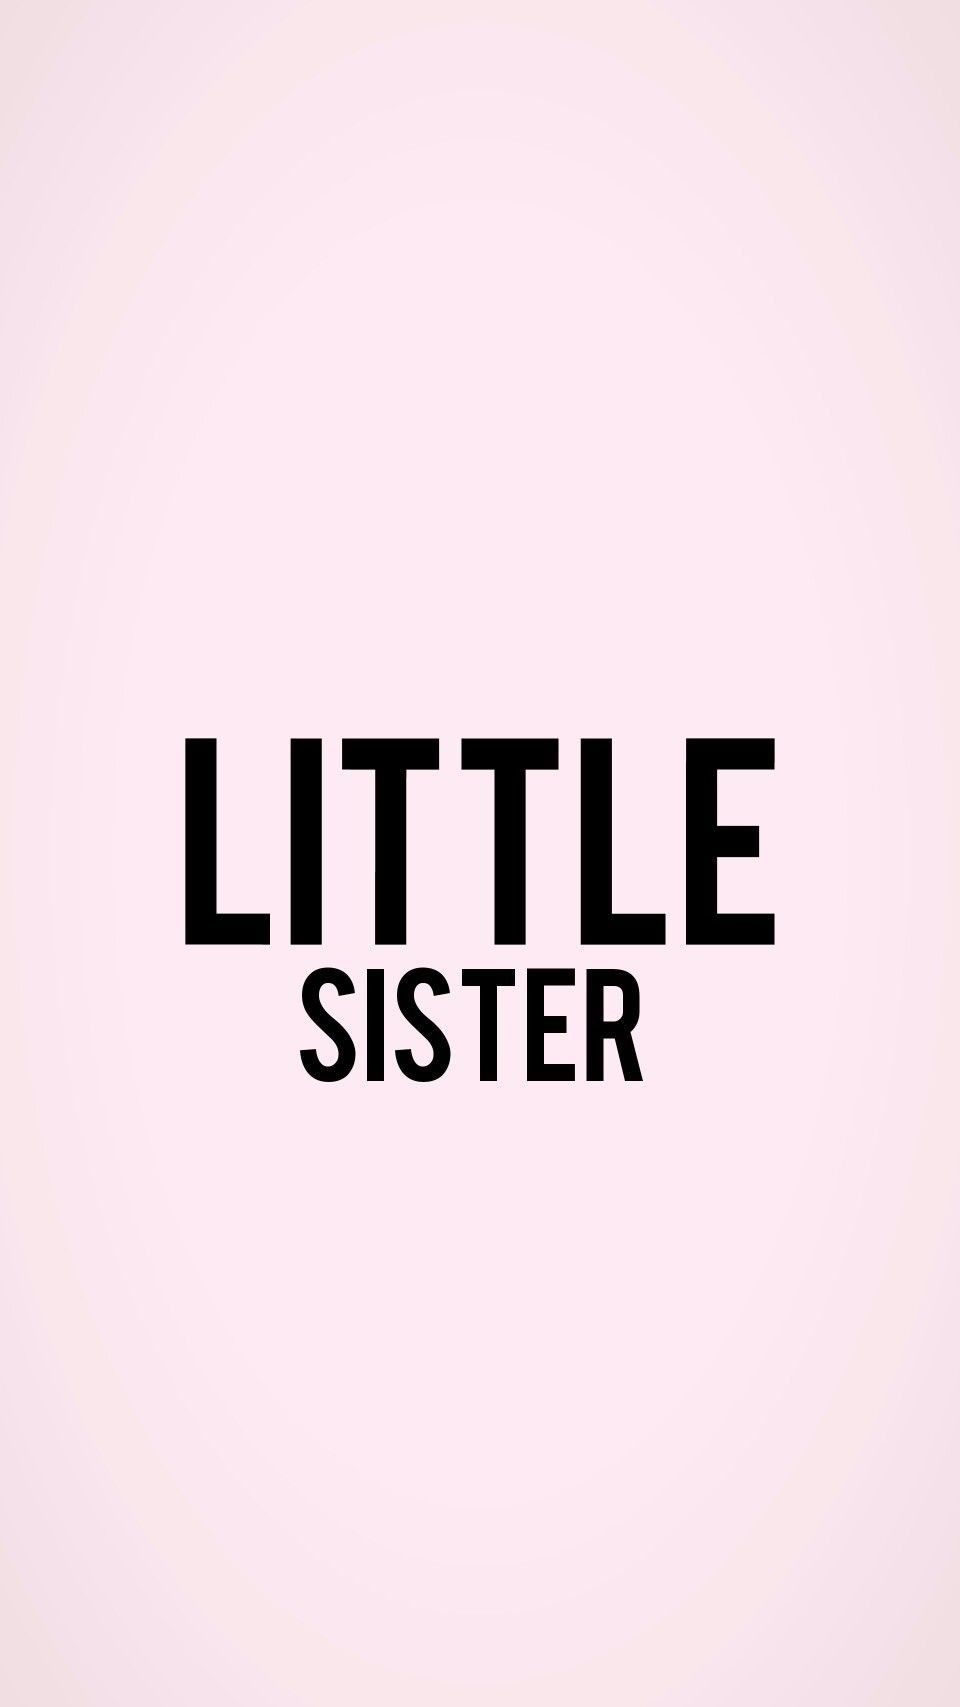 I Love My Little Sister poster wallpaper 12 X 18 Inches Paper Print   Quotes  Motivation posters in India  Buy art film design movie music  nature and educational paintingswallpapers at Flipkartcom